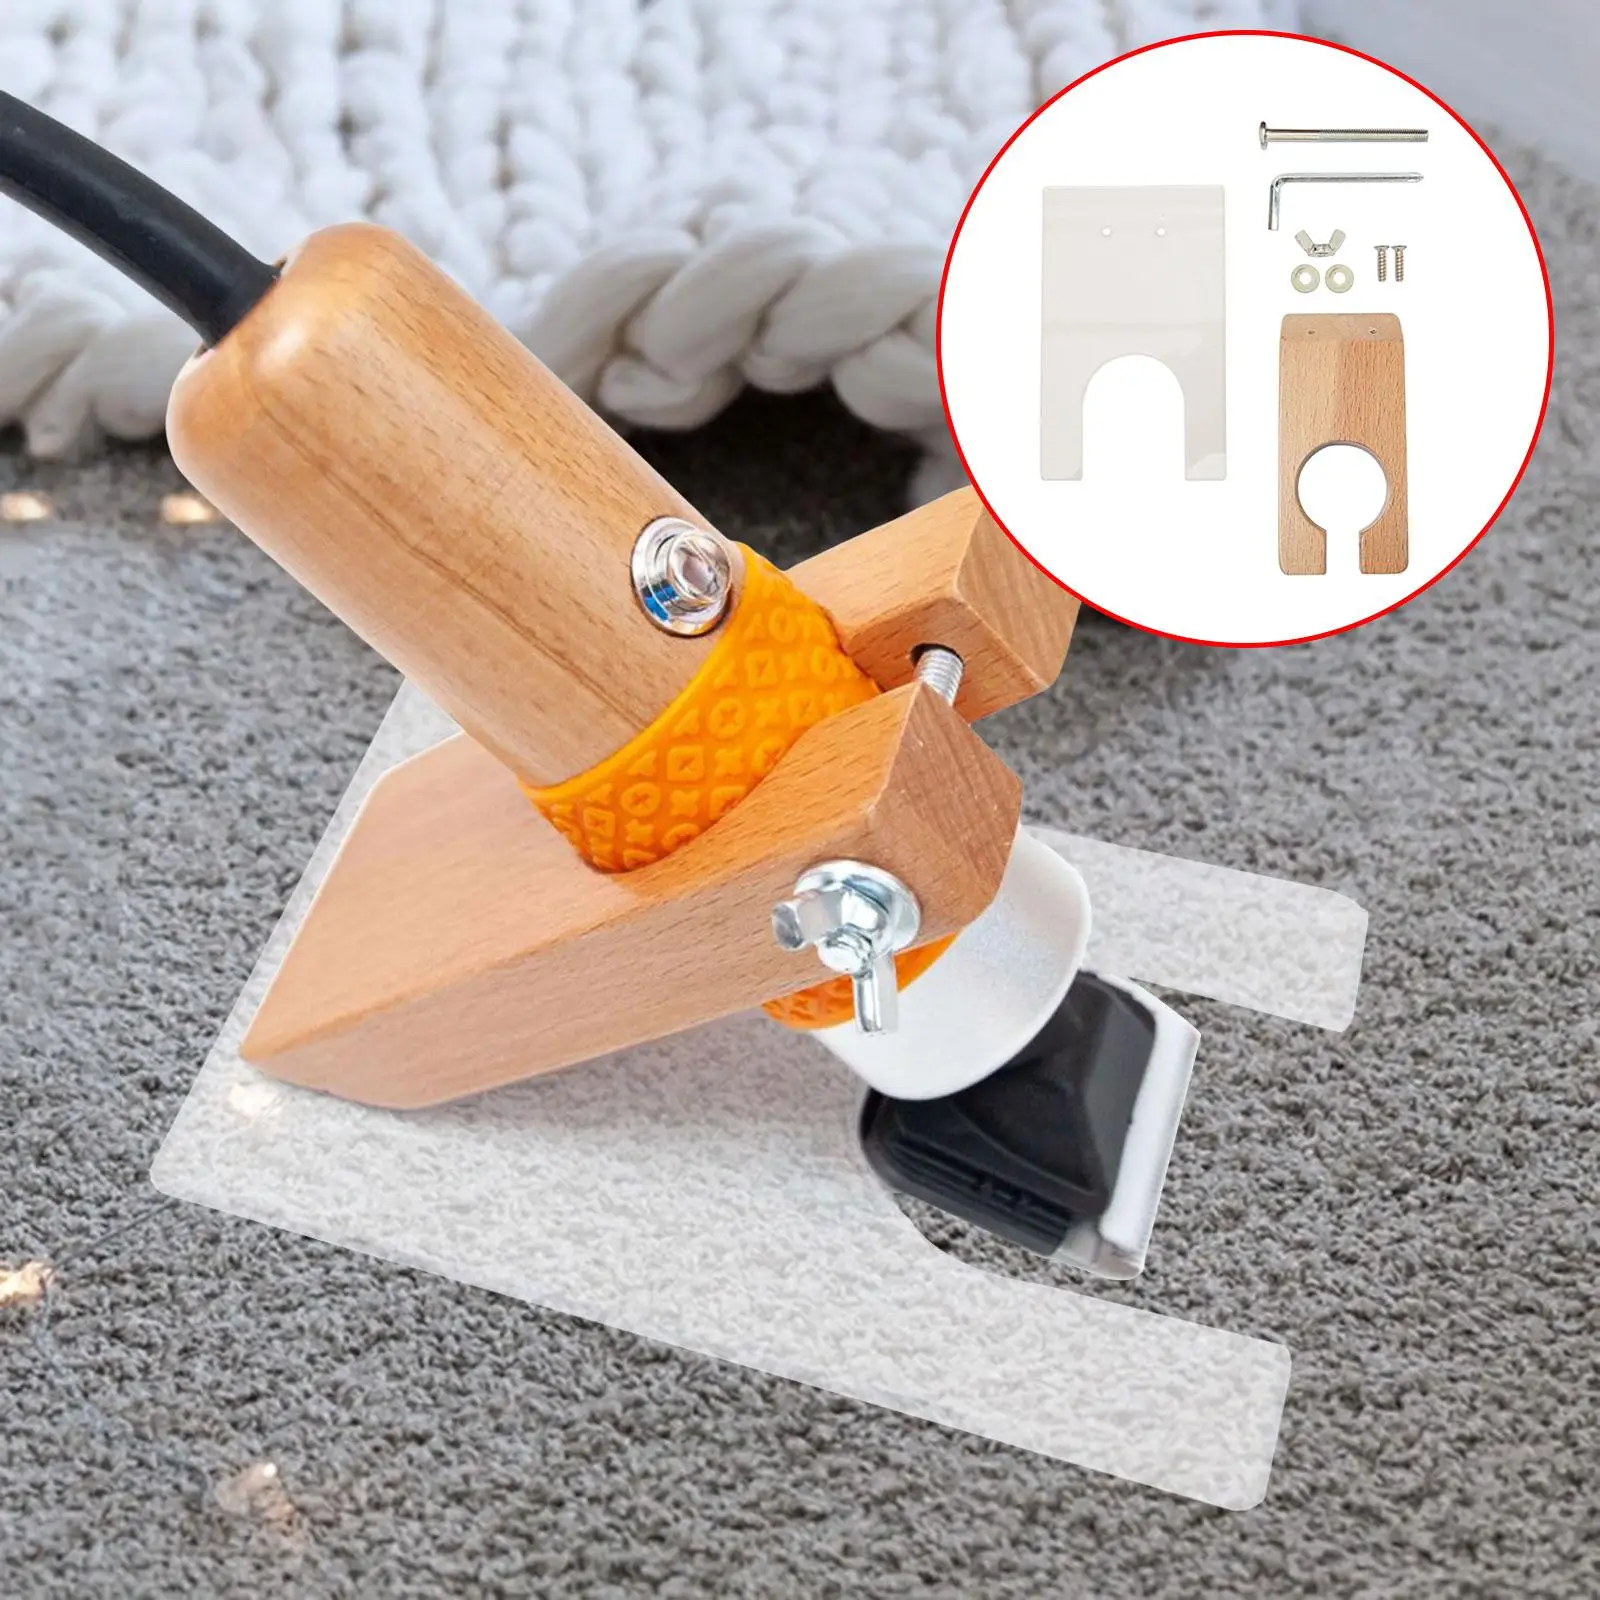 Carpet Trimmer Guide Shearing Guide Attachments Rug Tufting Tool Manual Kit Rug Tufting Carver Base for Tufting Tools Rug Making